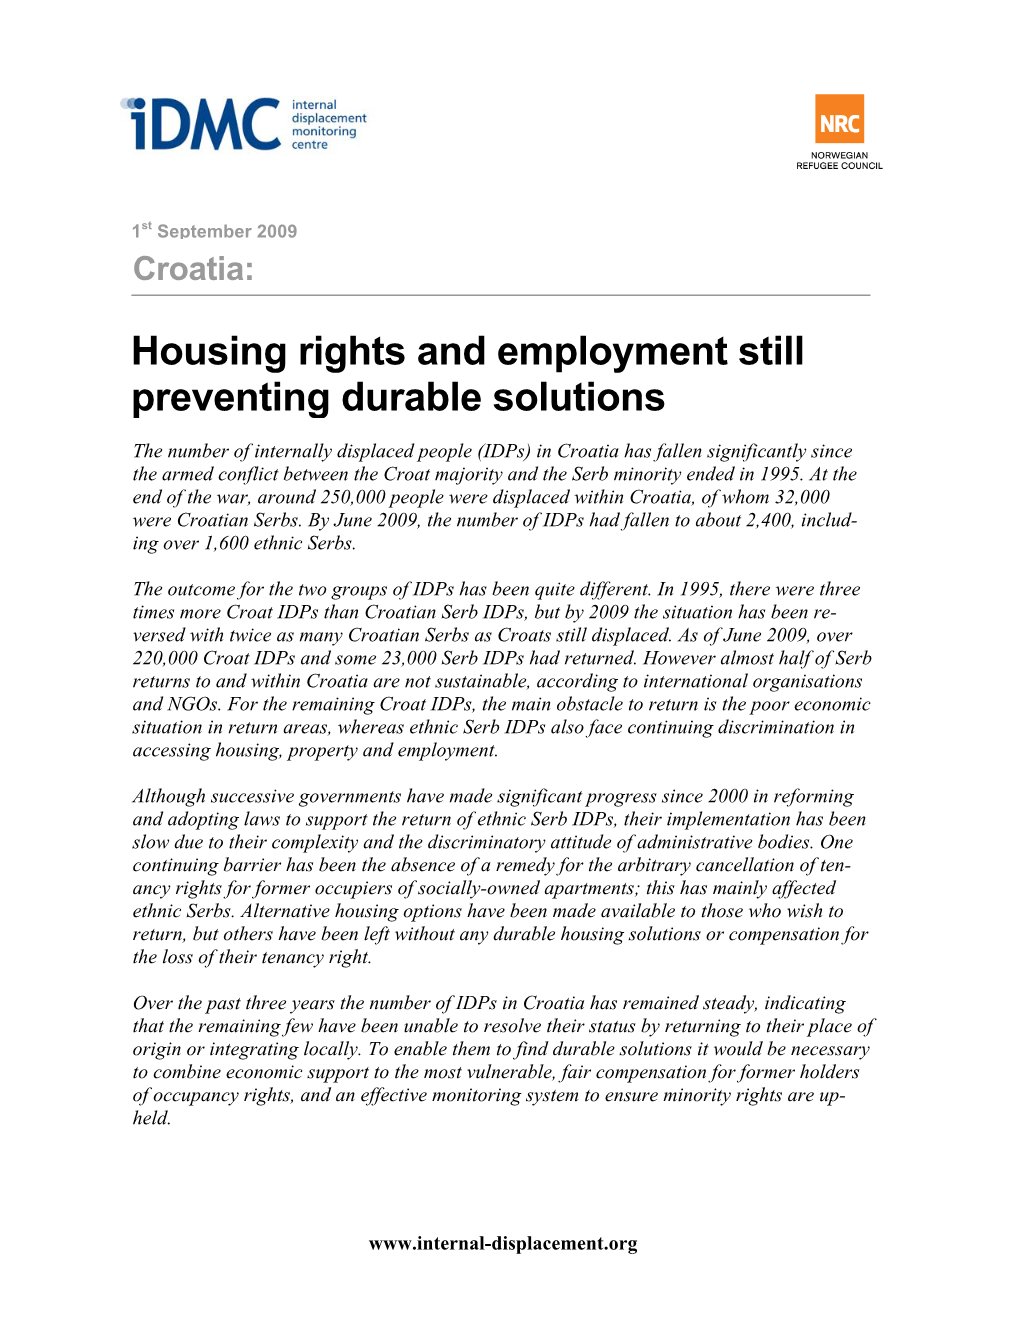 Housing Rights and Employment Still Preventing Durable Solutions